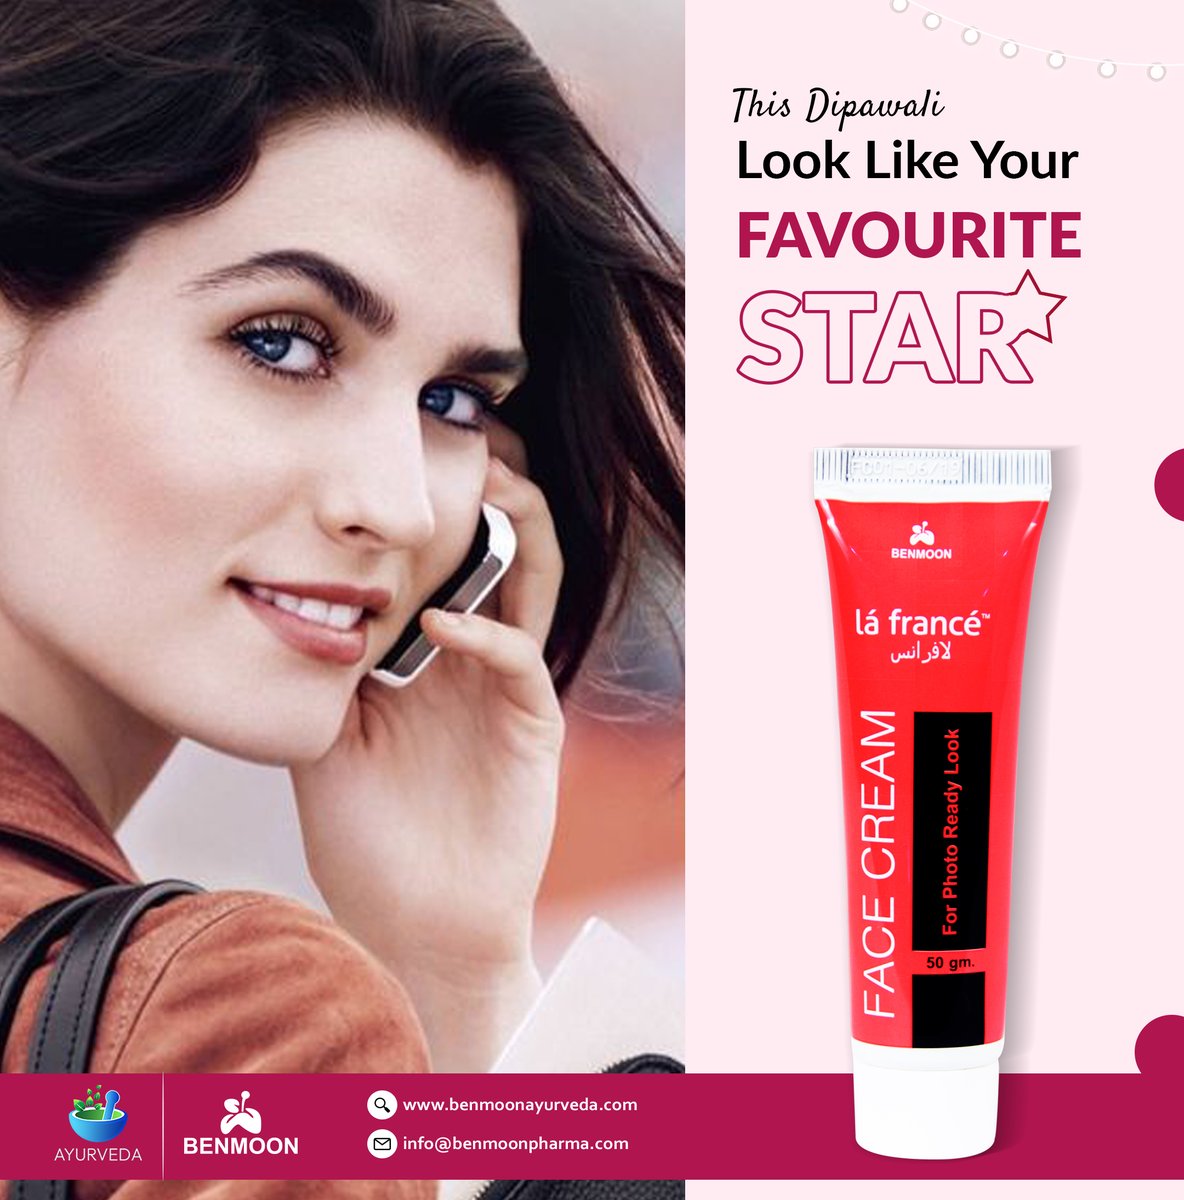 💪MANUFACTURED BY BENMOON PHARMA✔️
💃When You Put In Effort To Beautify Your Face🌹 #lafrancefacecream #photoready #lookbeautiful #gorgeousness #beautifulskin #lookstunning #lookgorgeous #benmoonskincare It's A Selfie Time💙
THIS DIWALI LOOK LIKE YOUR FAVOURITE STAR